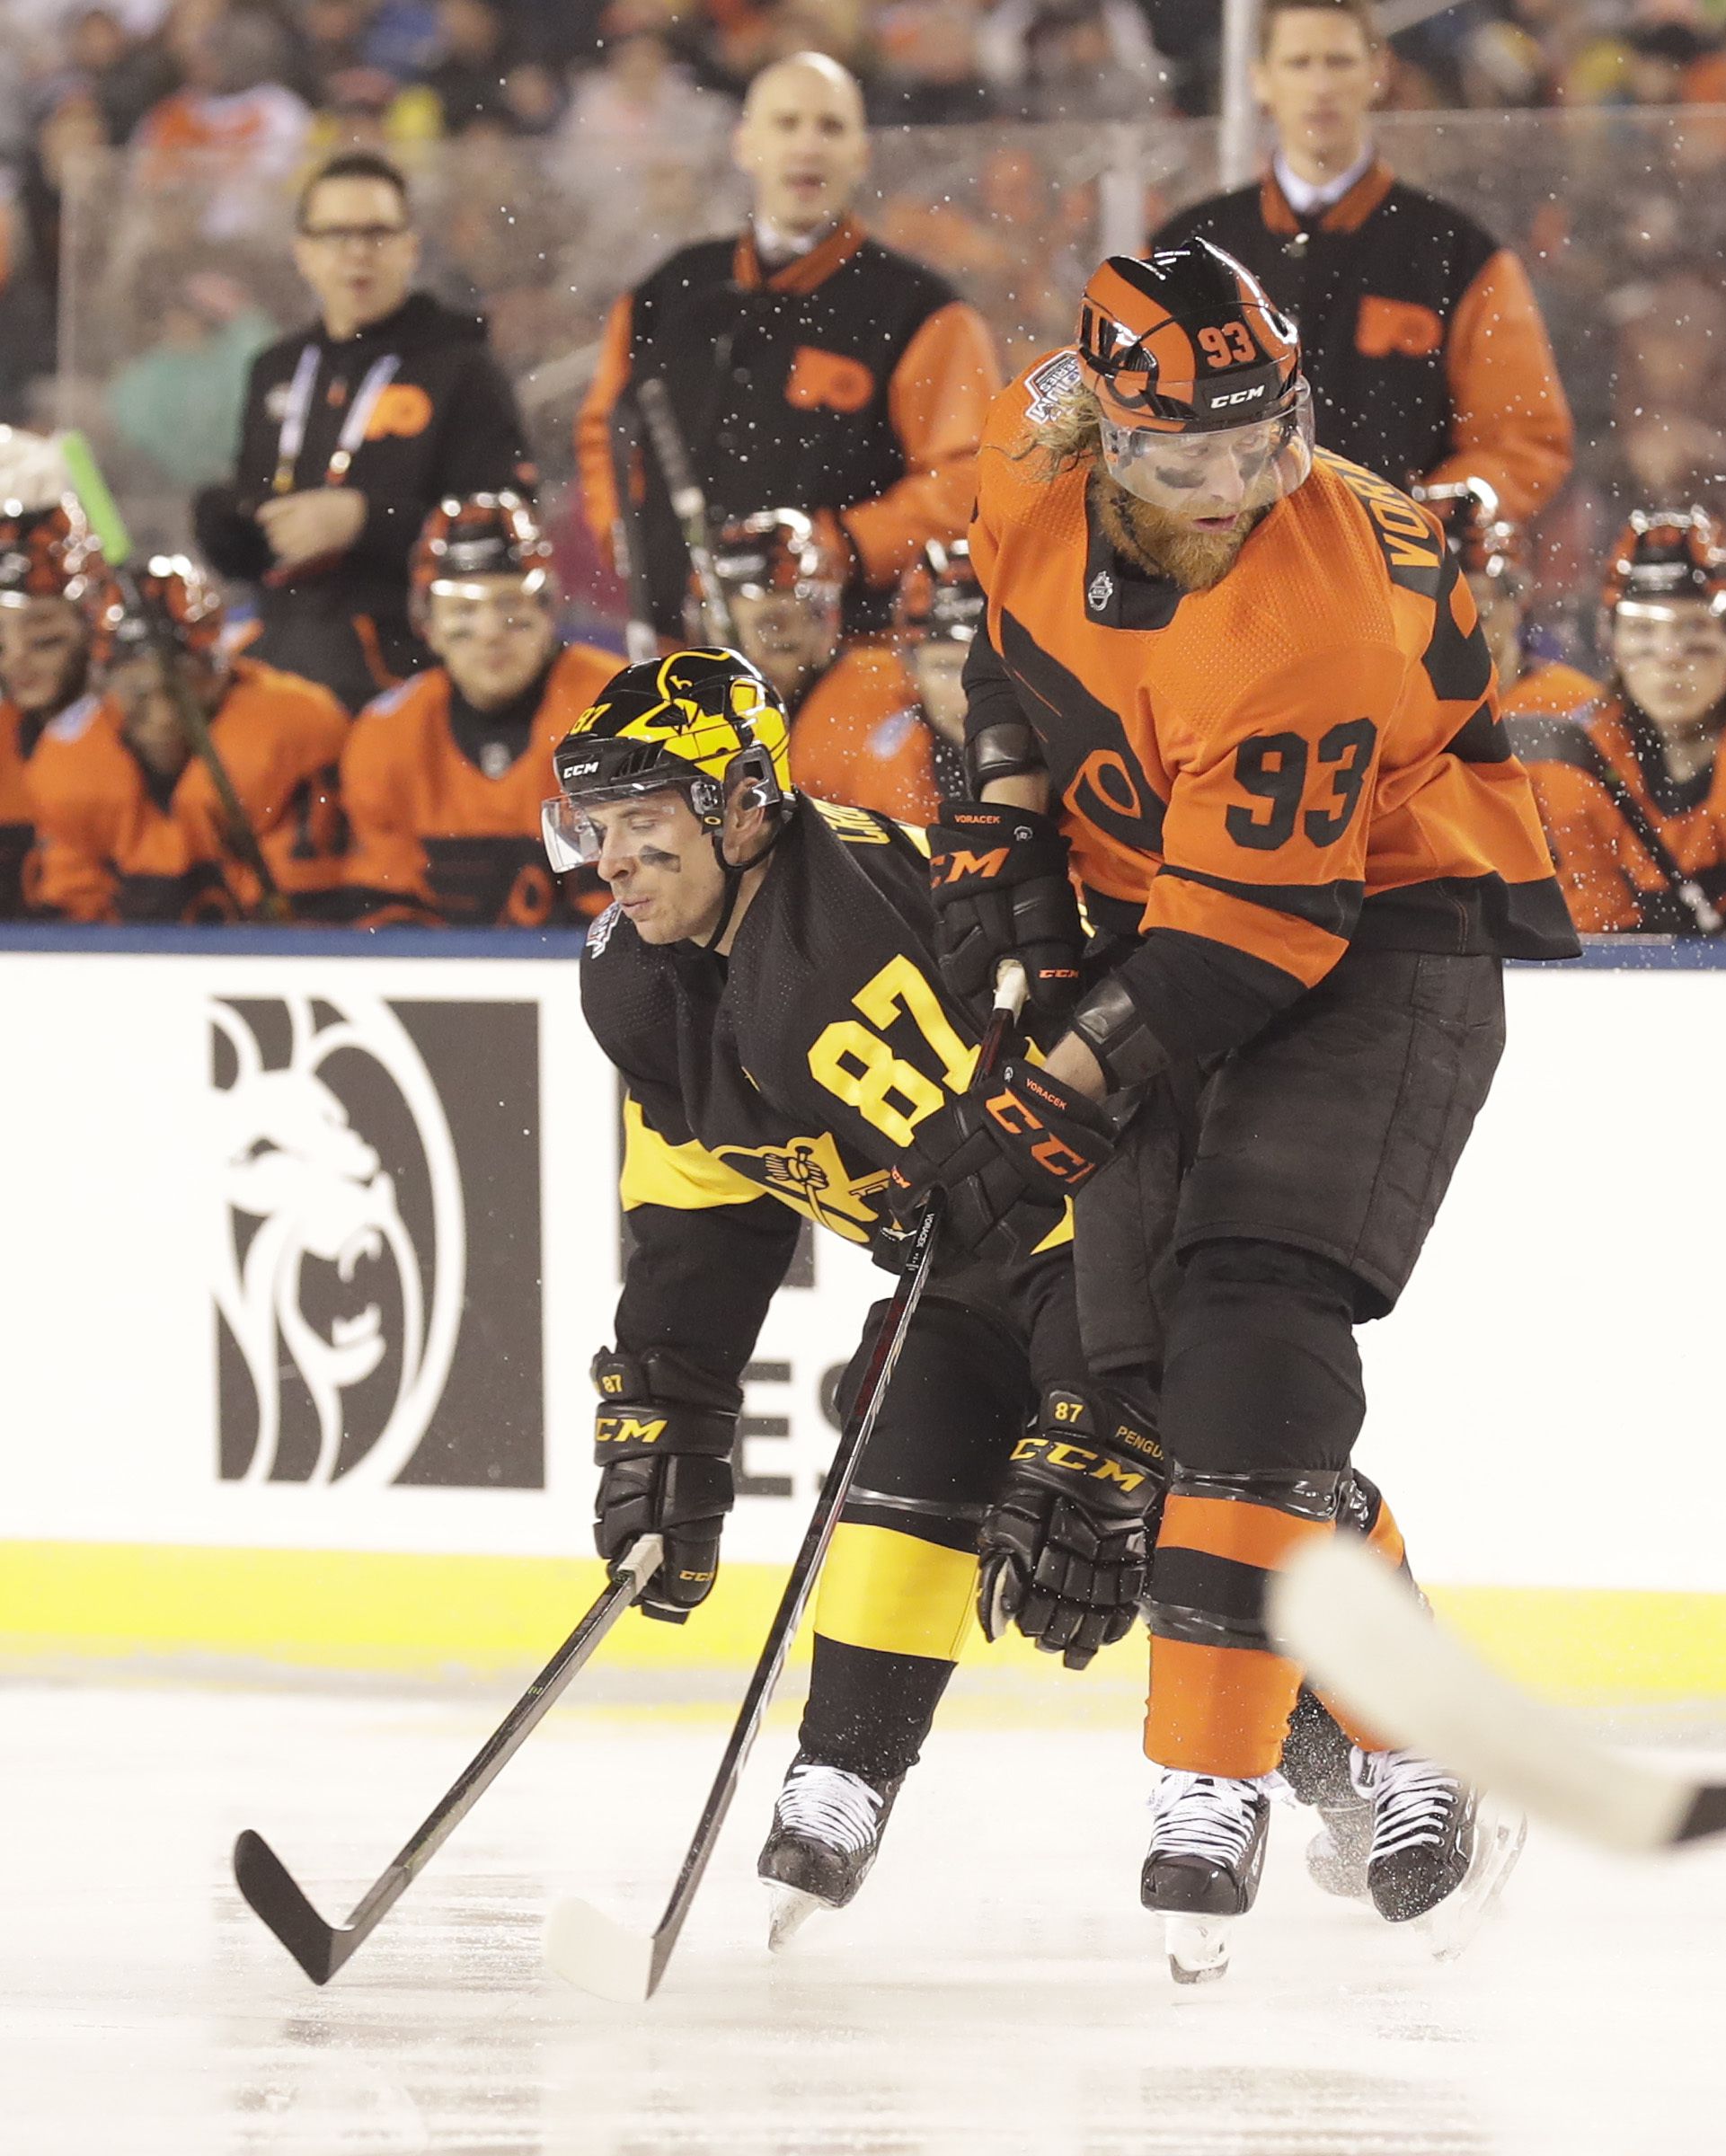 Photo Story] Recapping the 2019 Penguins-Flyers Stadium Series